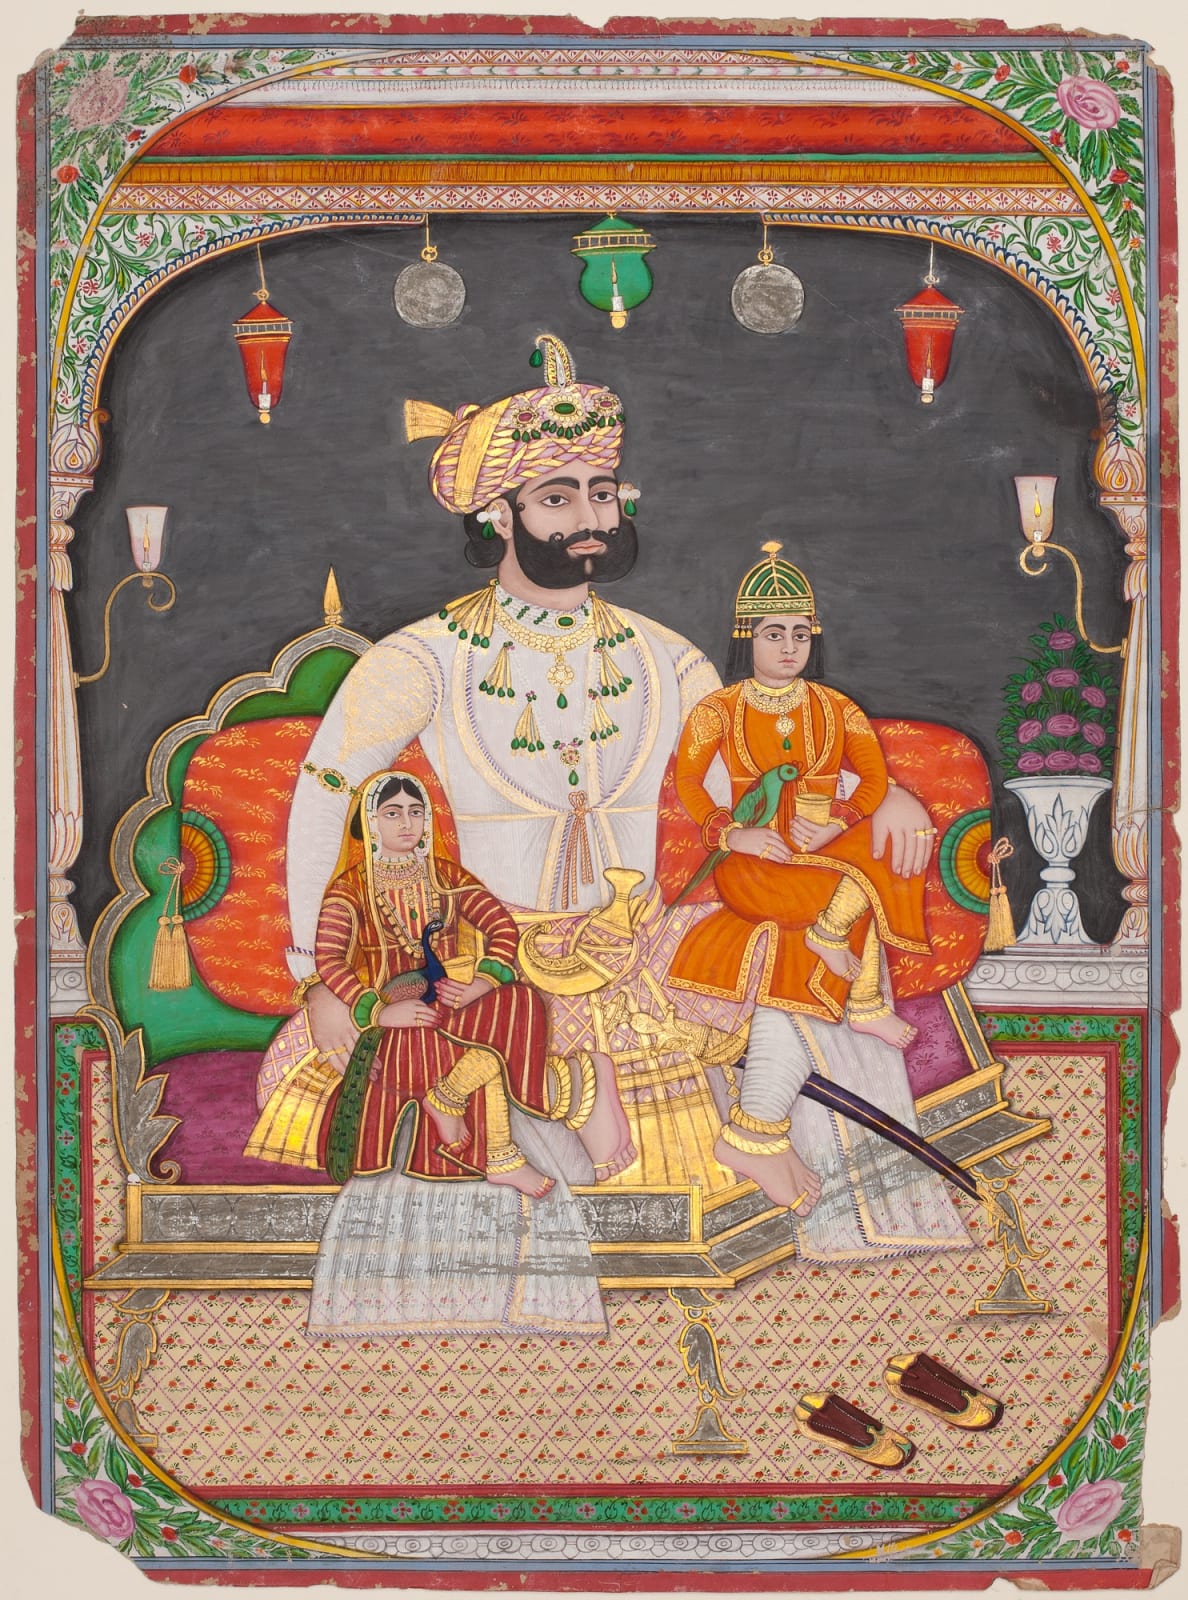 A Maharaja with his two Children, Rajasthan, c. 1870-80